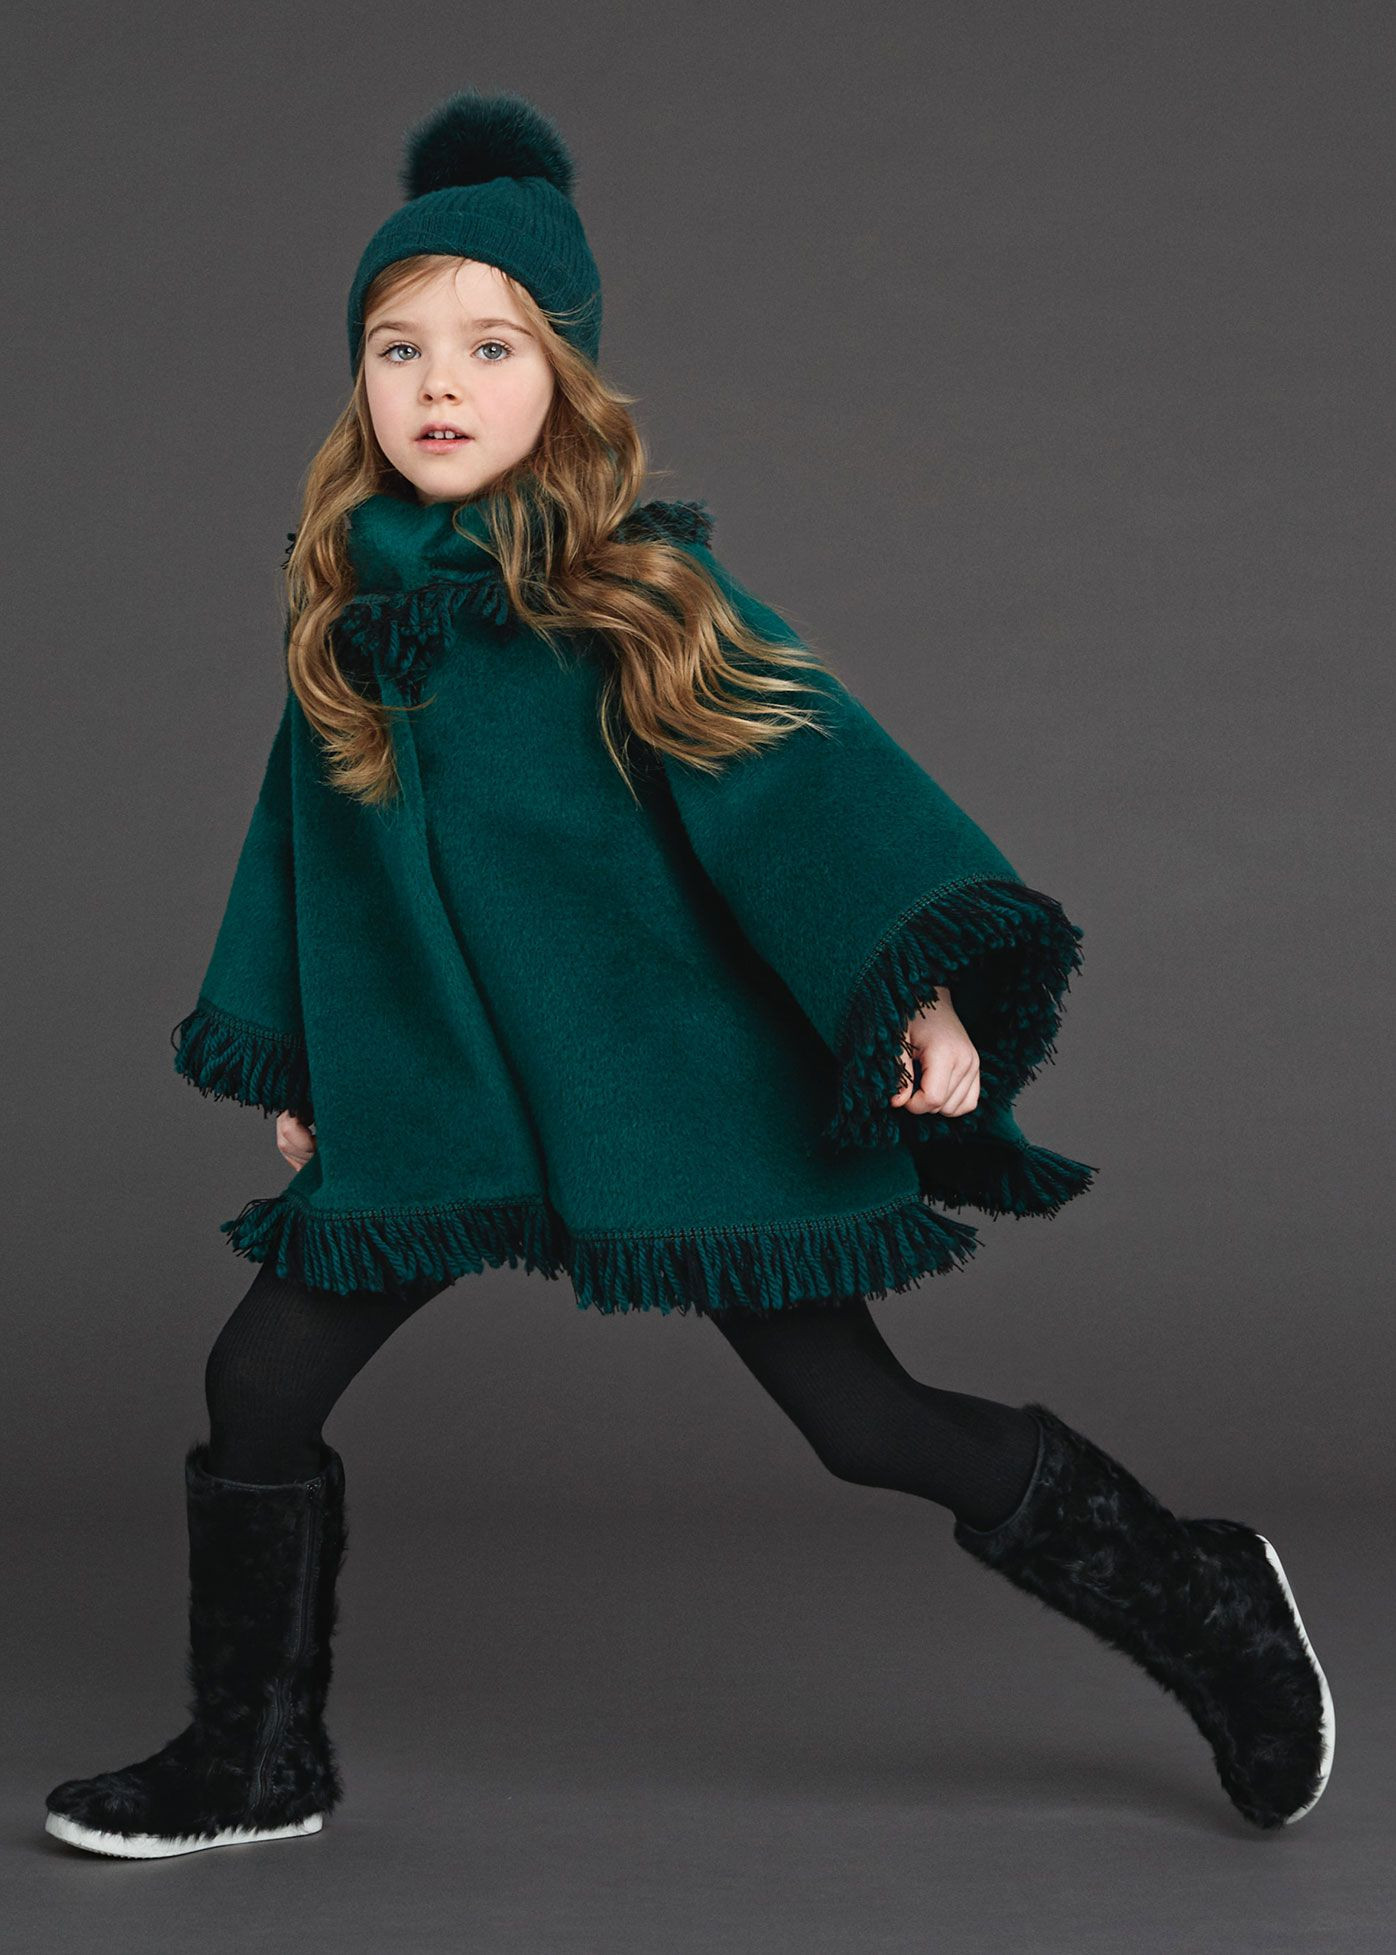 Kids Fall Fashion
 Dolce&Gabbana ficial Site and Line Store The Fall